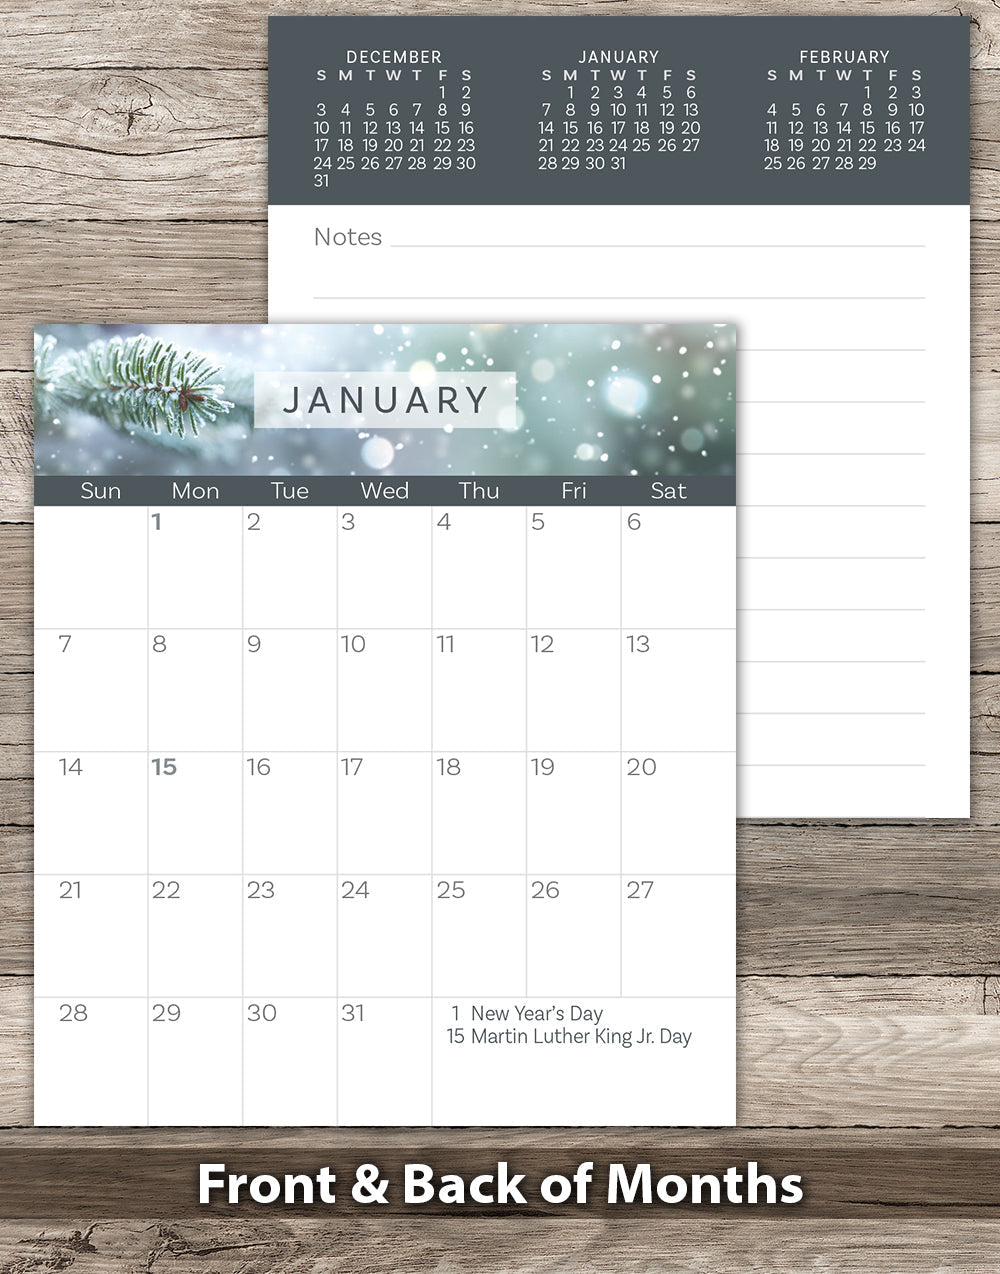 2024 Magnetic Business Card Tear-Off Calendars - Year-End Appreciation for  Clients